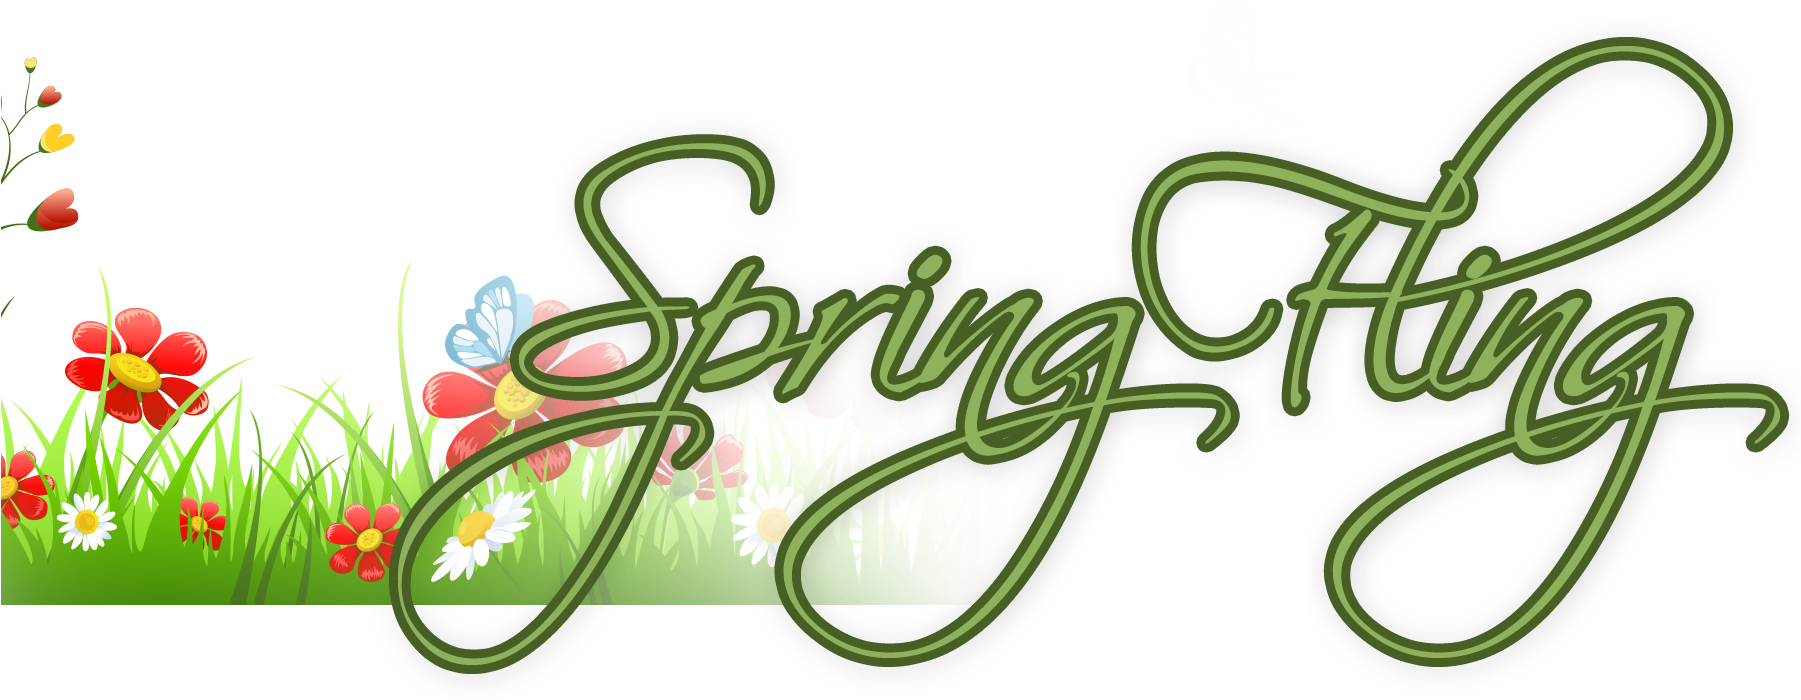 We're Excited About Celebrating Spring - Spring Fling (1800x750)